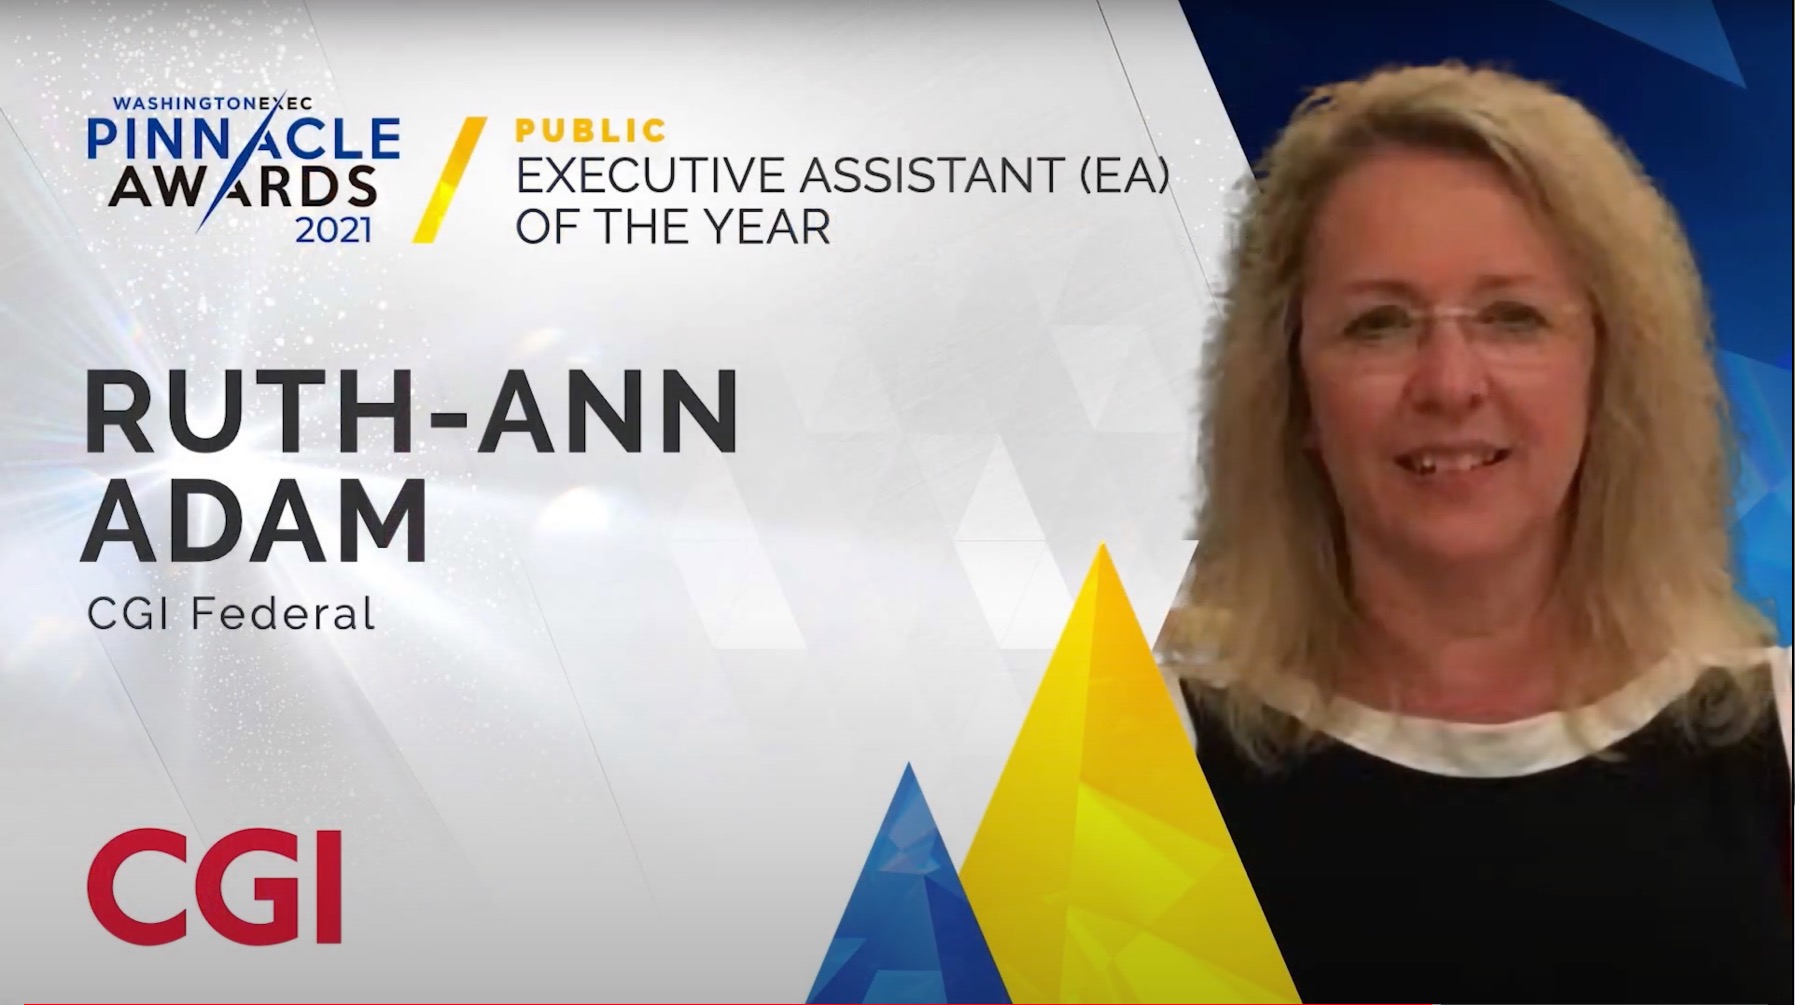 EA - Congratulations to Ruth-Ann Adam from CGI Federal on winning the award for Executive Assistant of the Year (EA) in the Public Sector